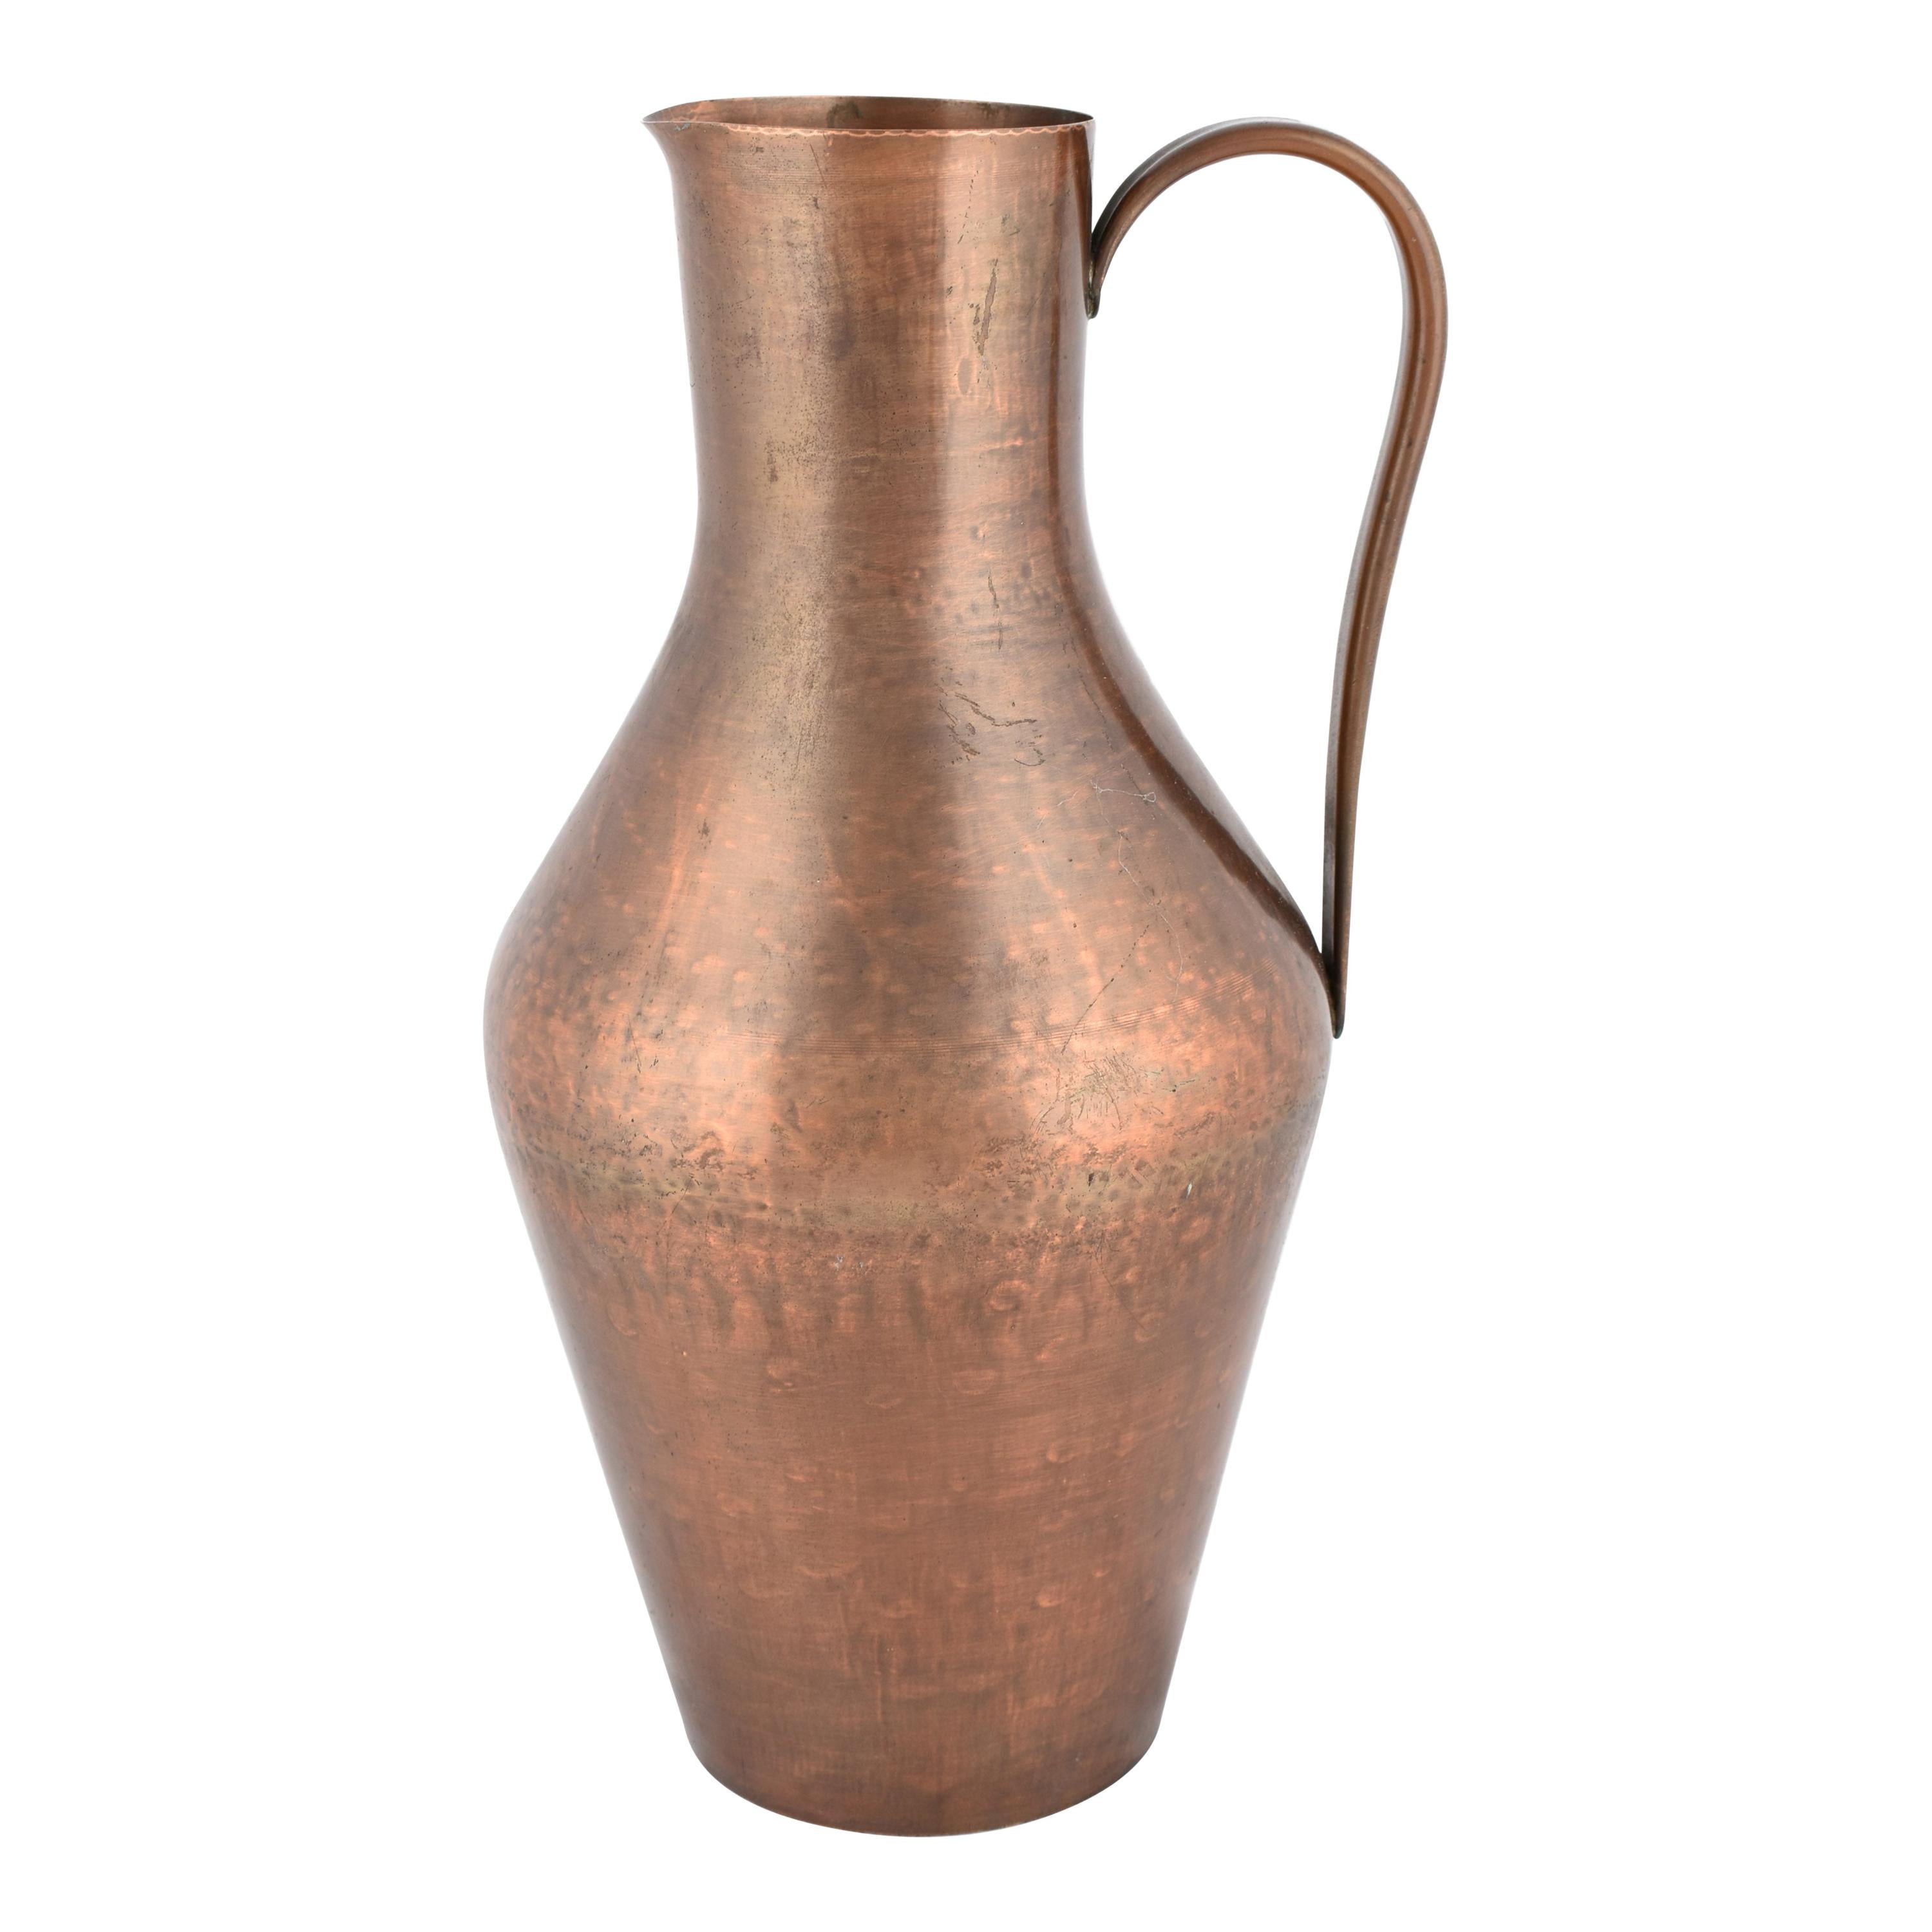 Vintage Copper Pitcher or Vase with Handle by Harald Buchrucker